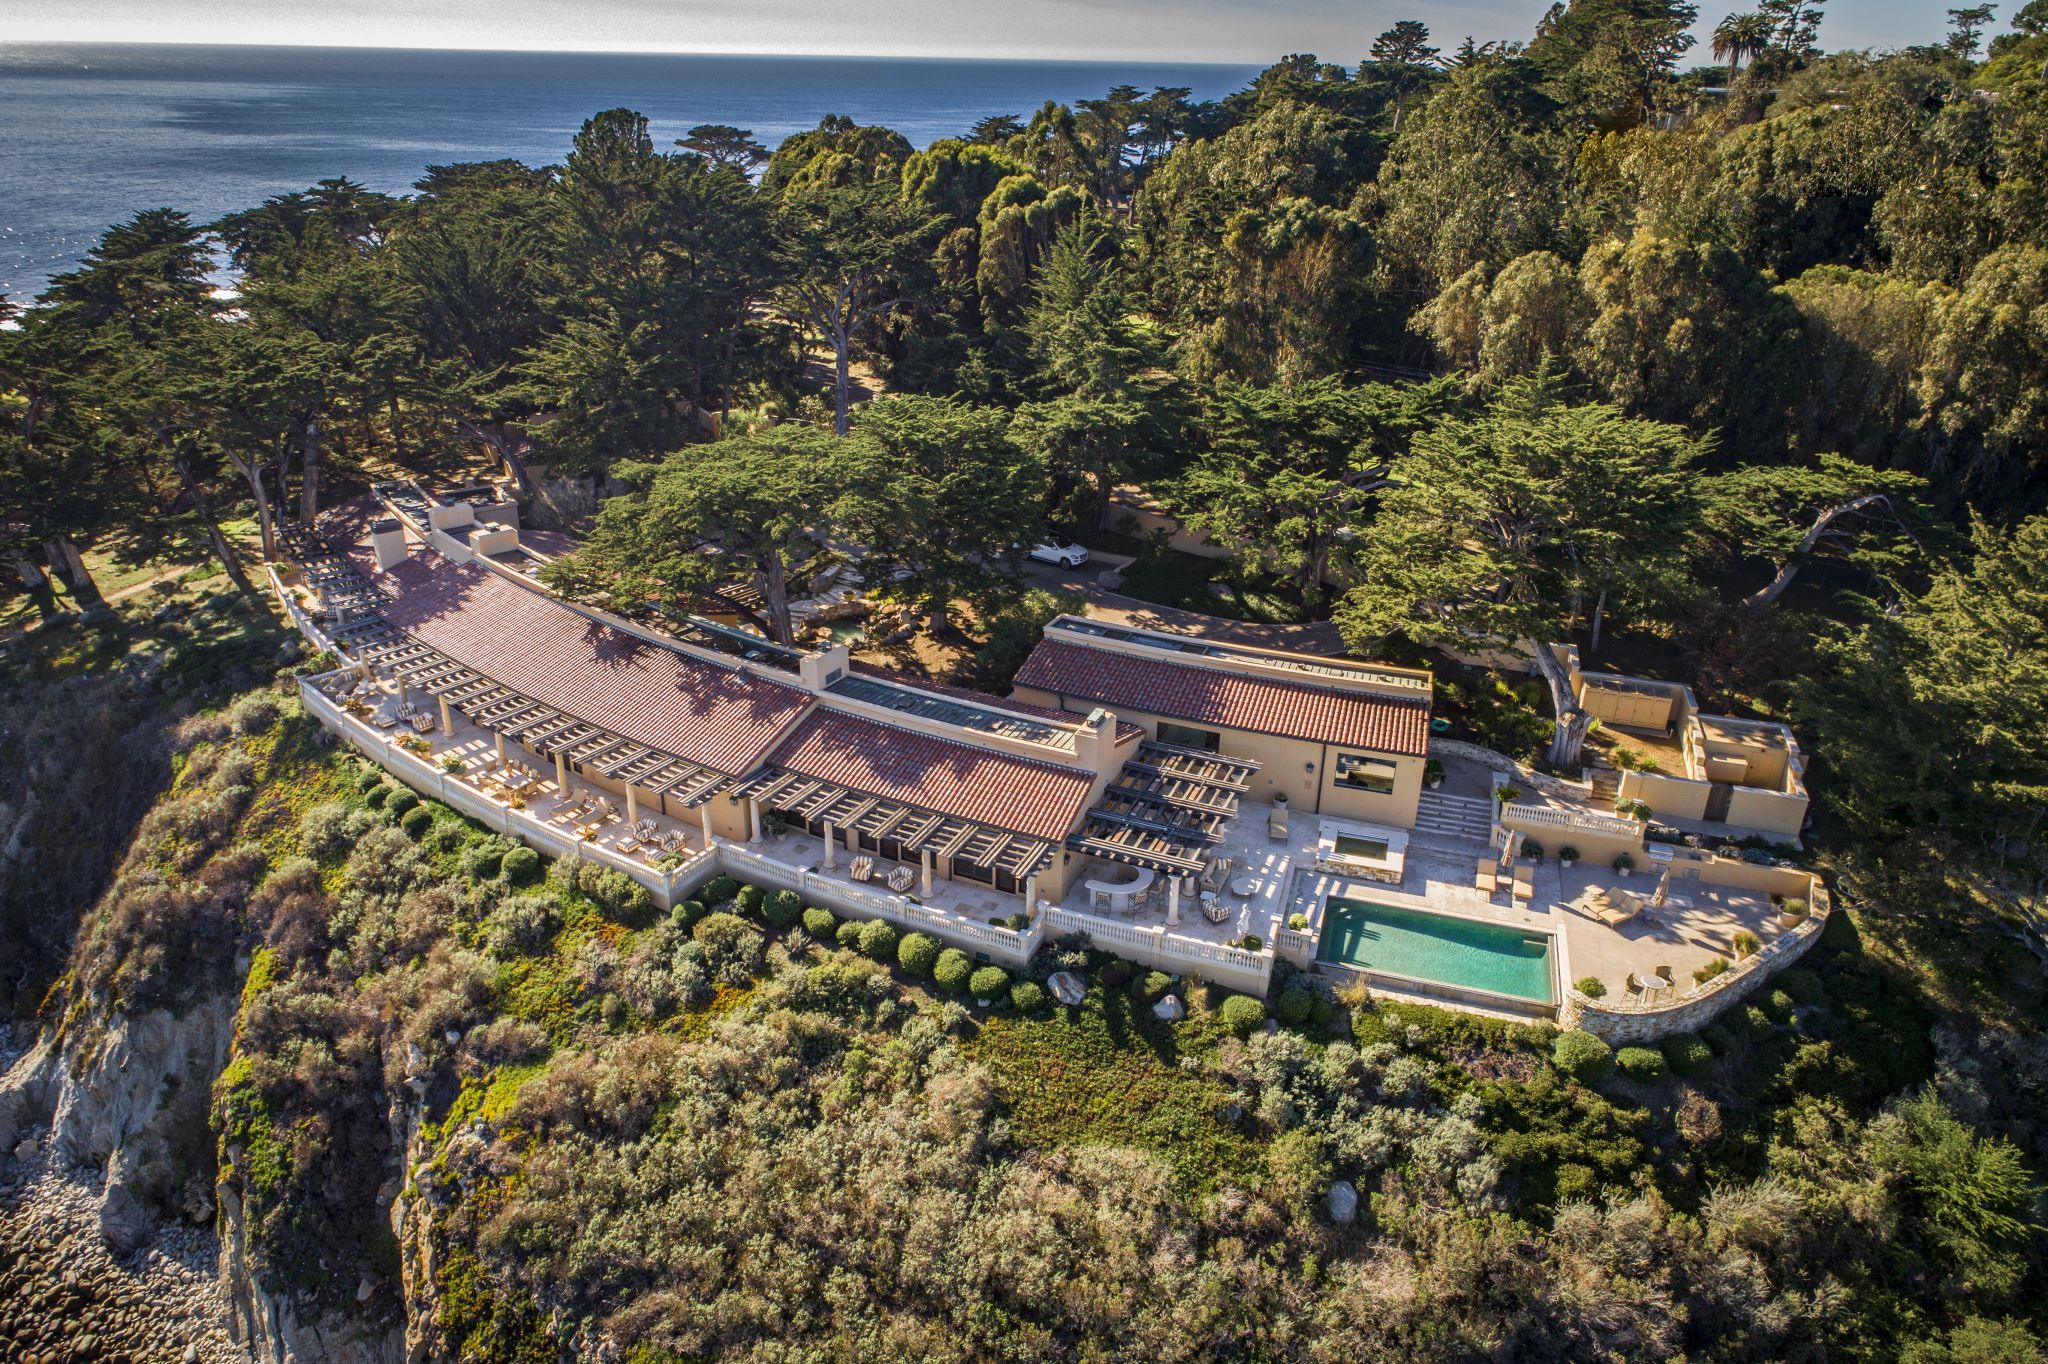 Pebble Beach house built to take in ocean views listed for $34.9 million - SFGate